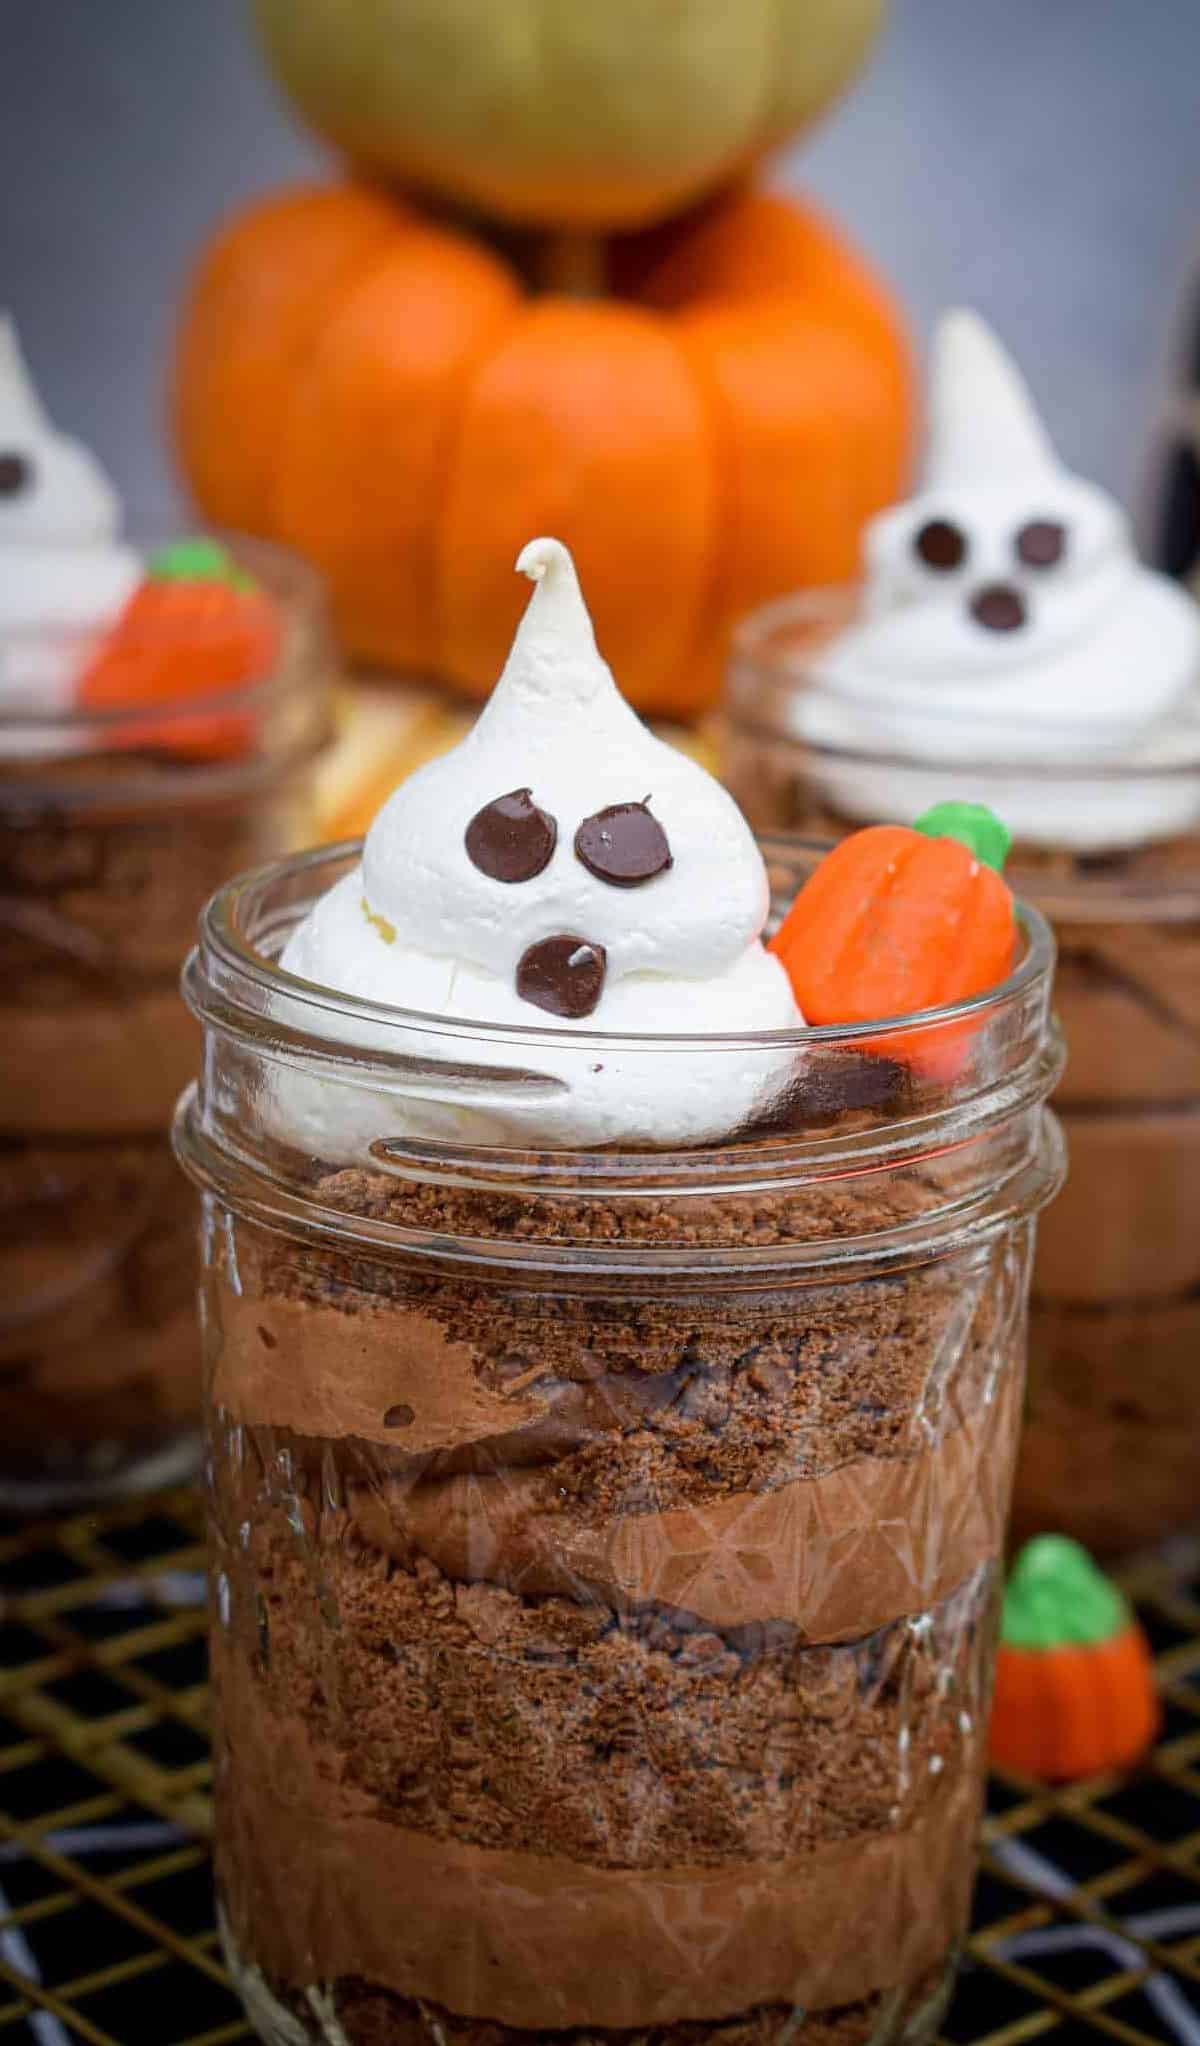  Serve these cute ghosts to your guests and make Halloween more memorable.